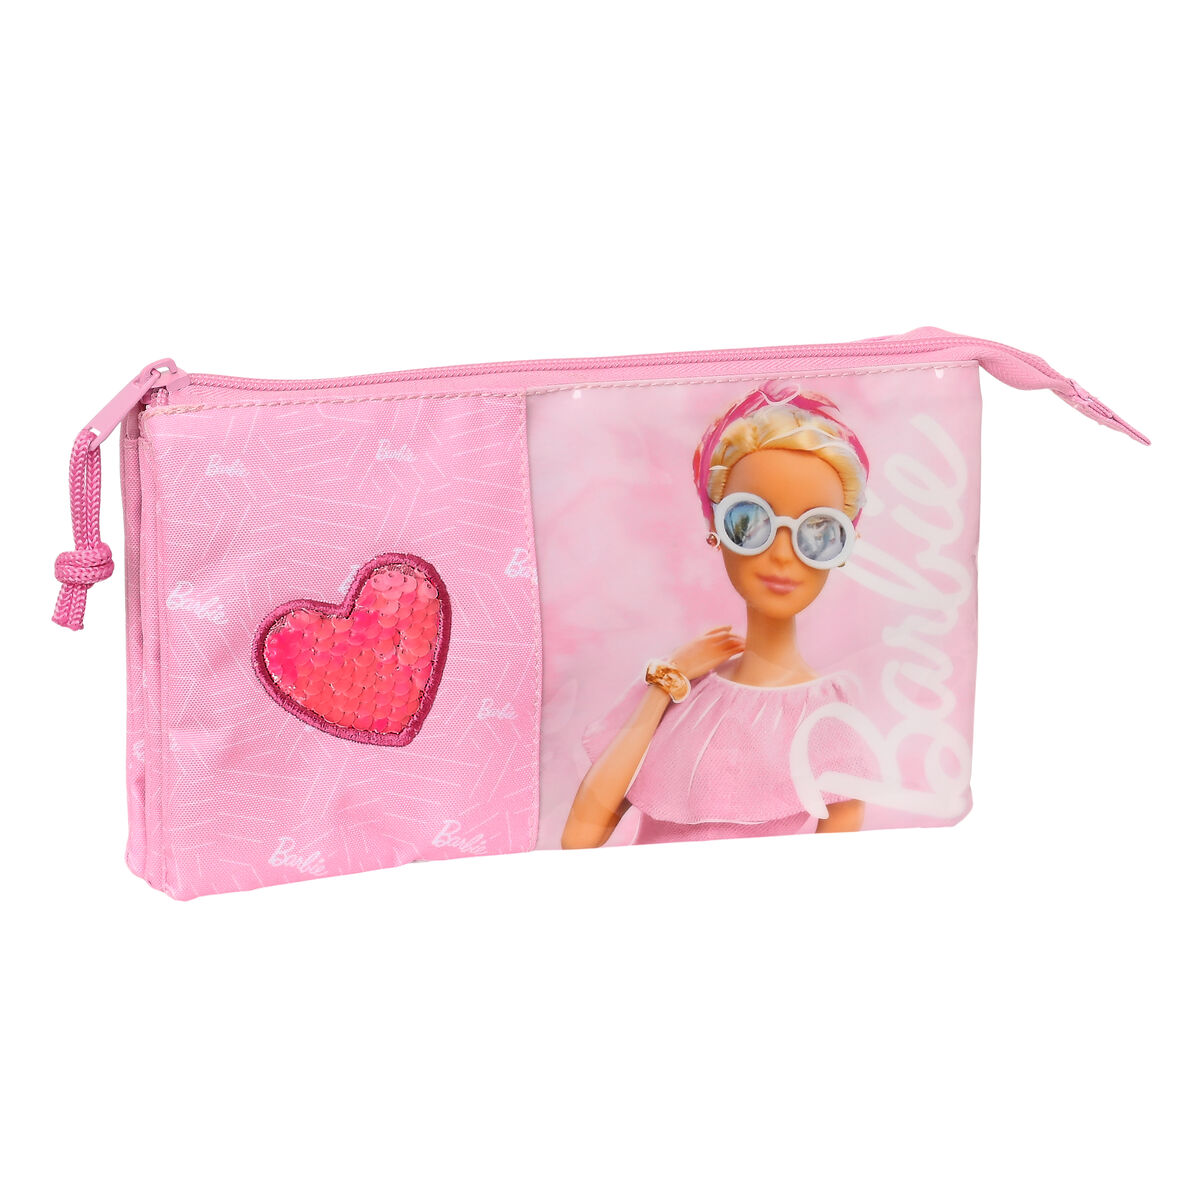 Triple Carry-all Barbie Girl Pink (22 x 12 x 3 cm)